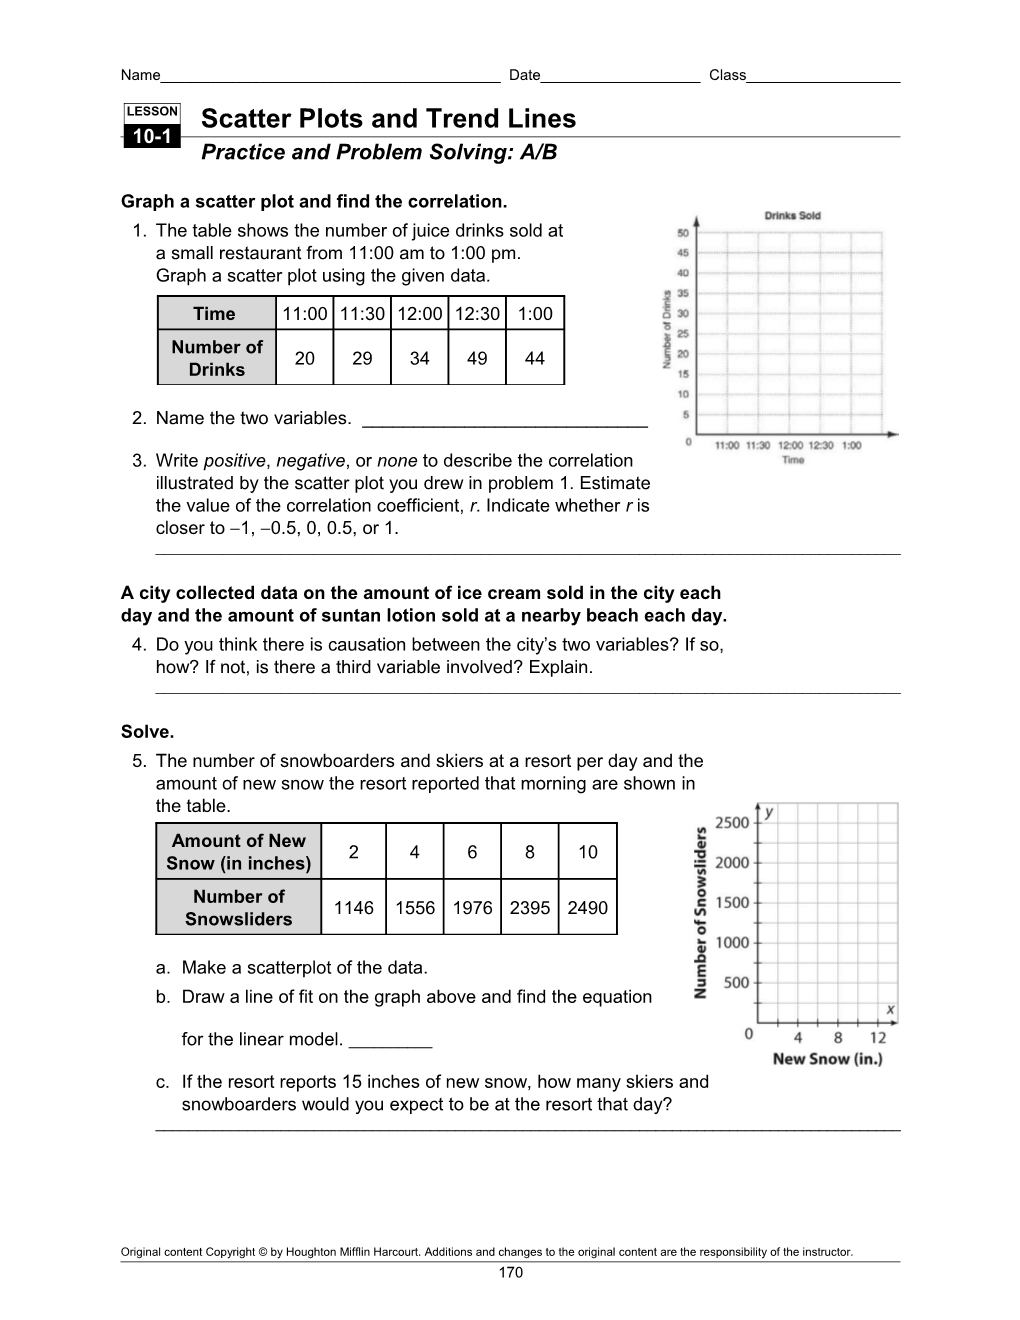 Graph a Scatter Plot and Find the Correlation